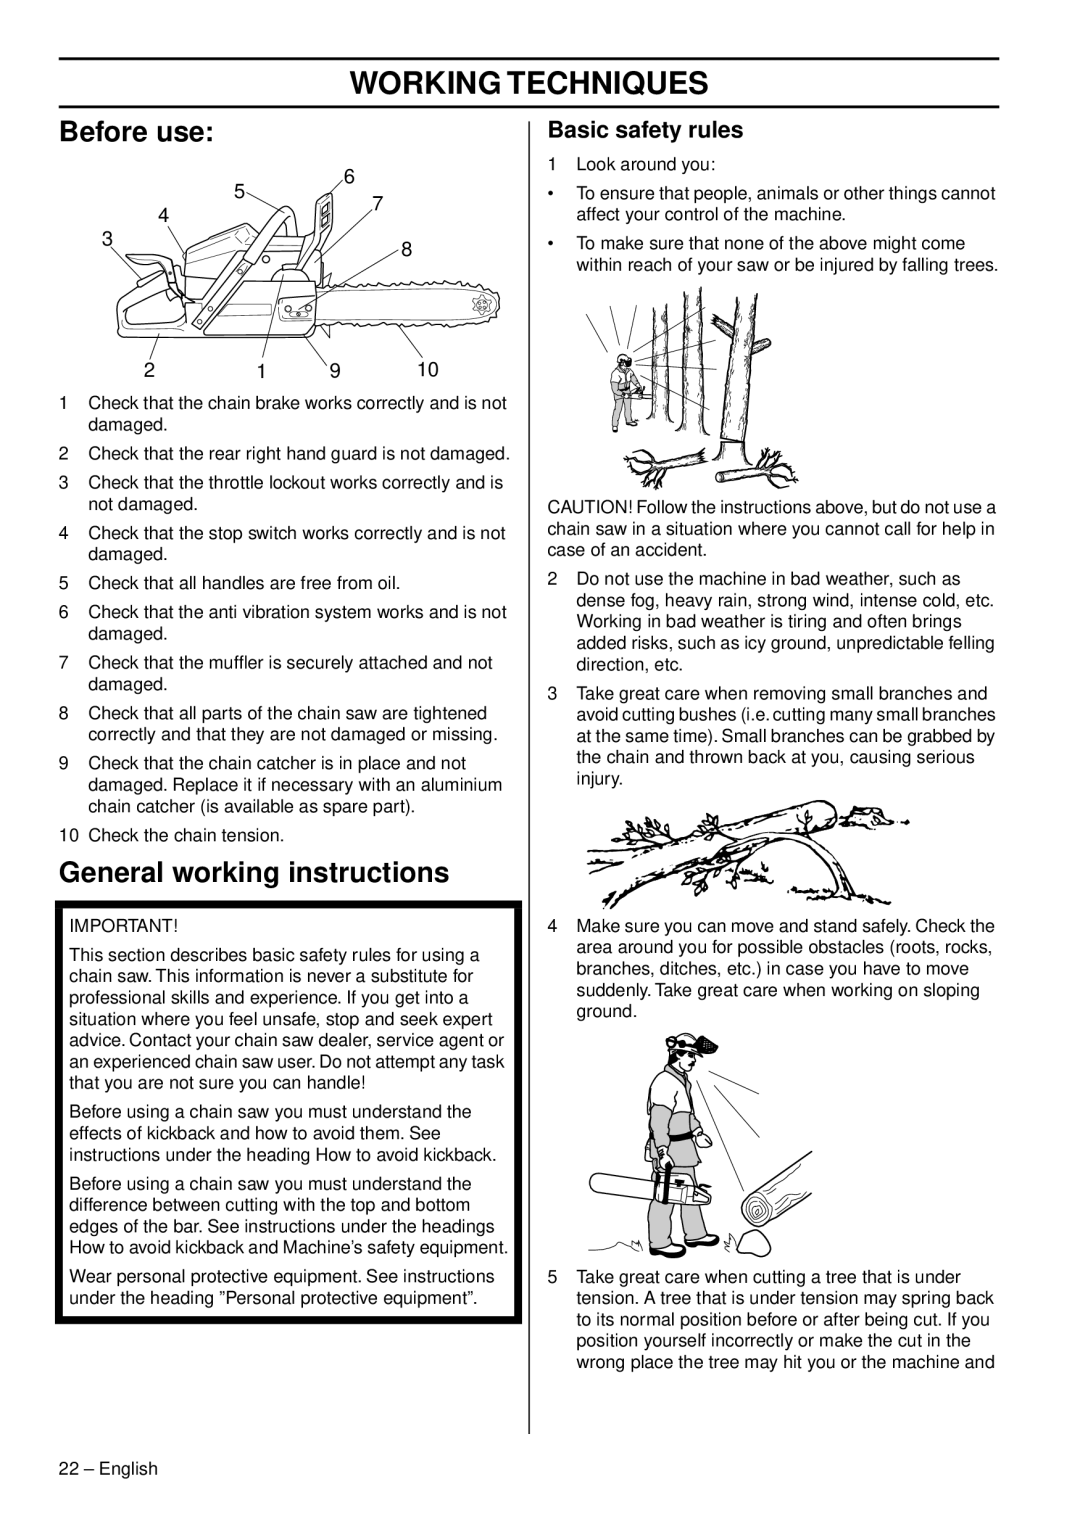 Husqvarna 353 E-tech, 353G E-tech manual Working Techniques, Before use, General working instructions, Basic safety rules 